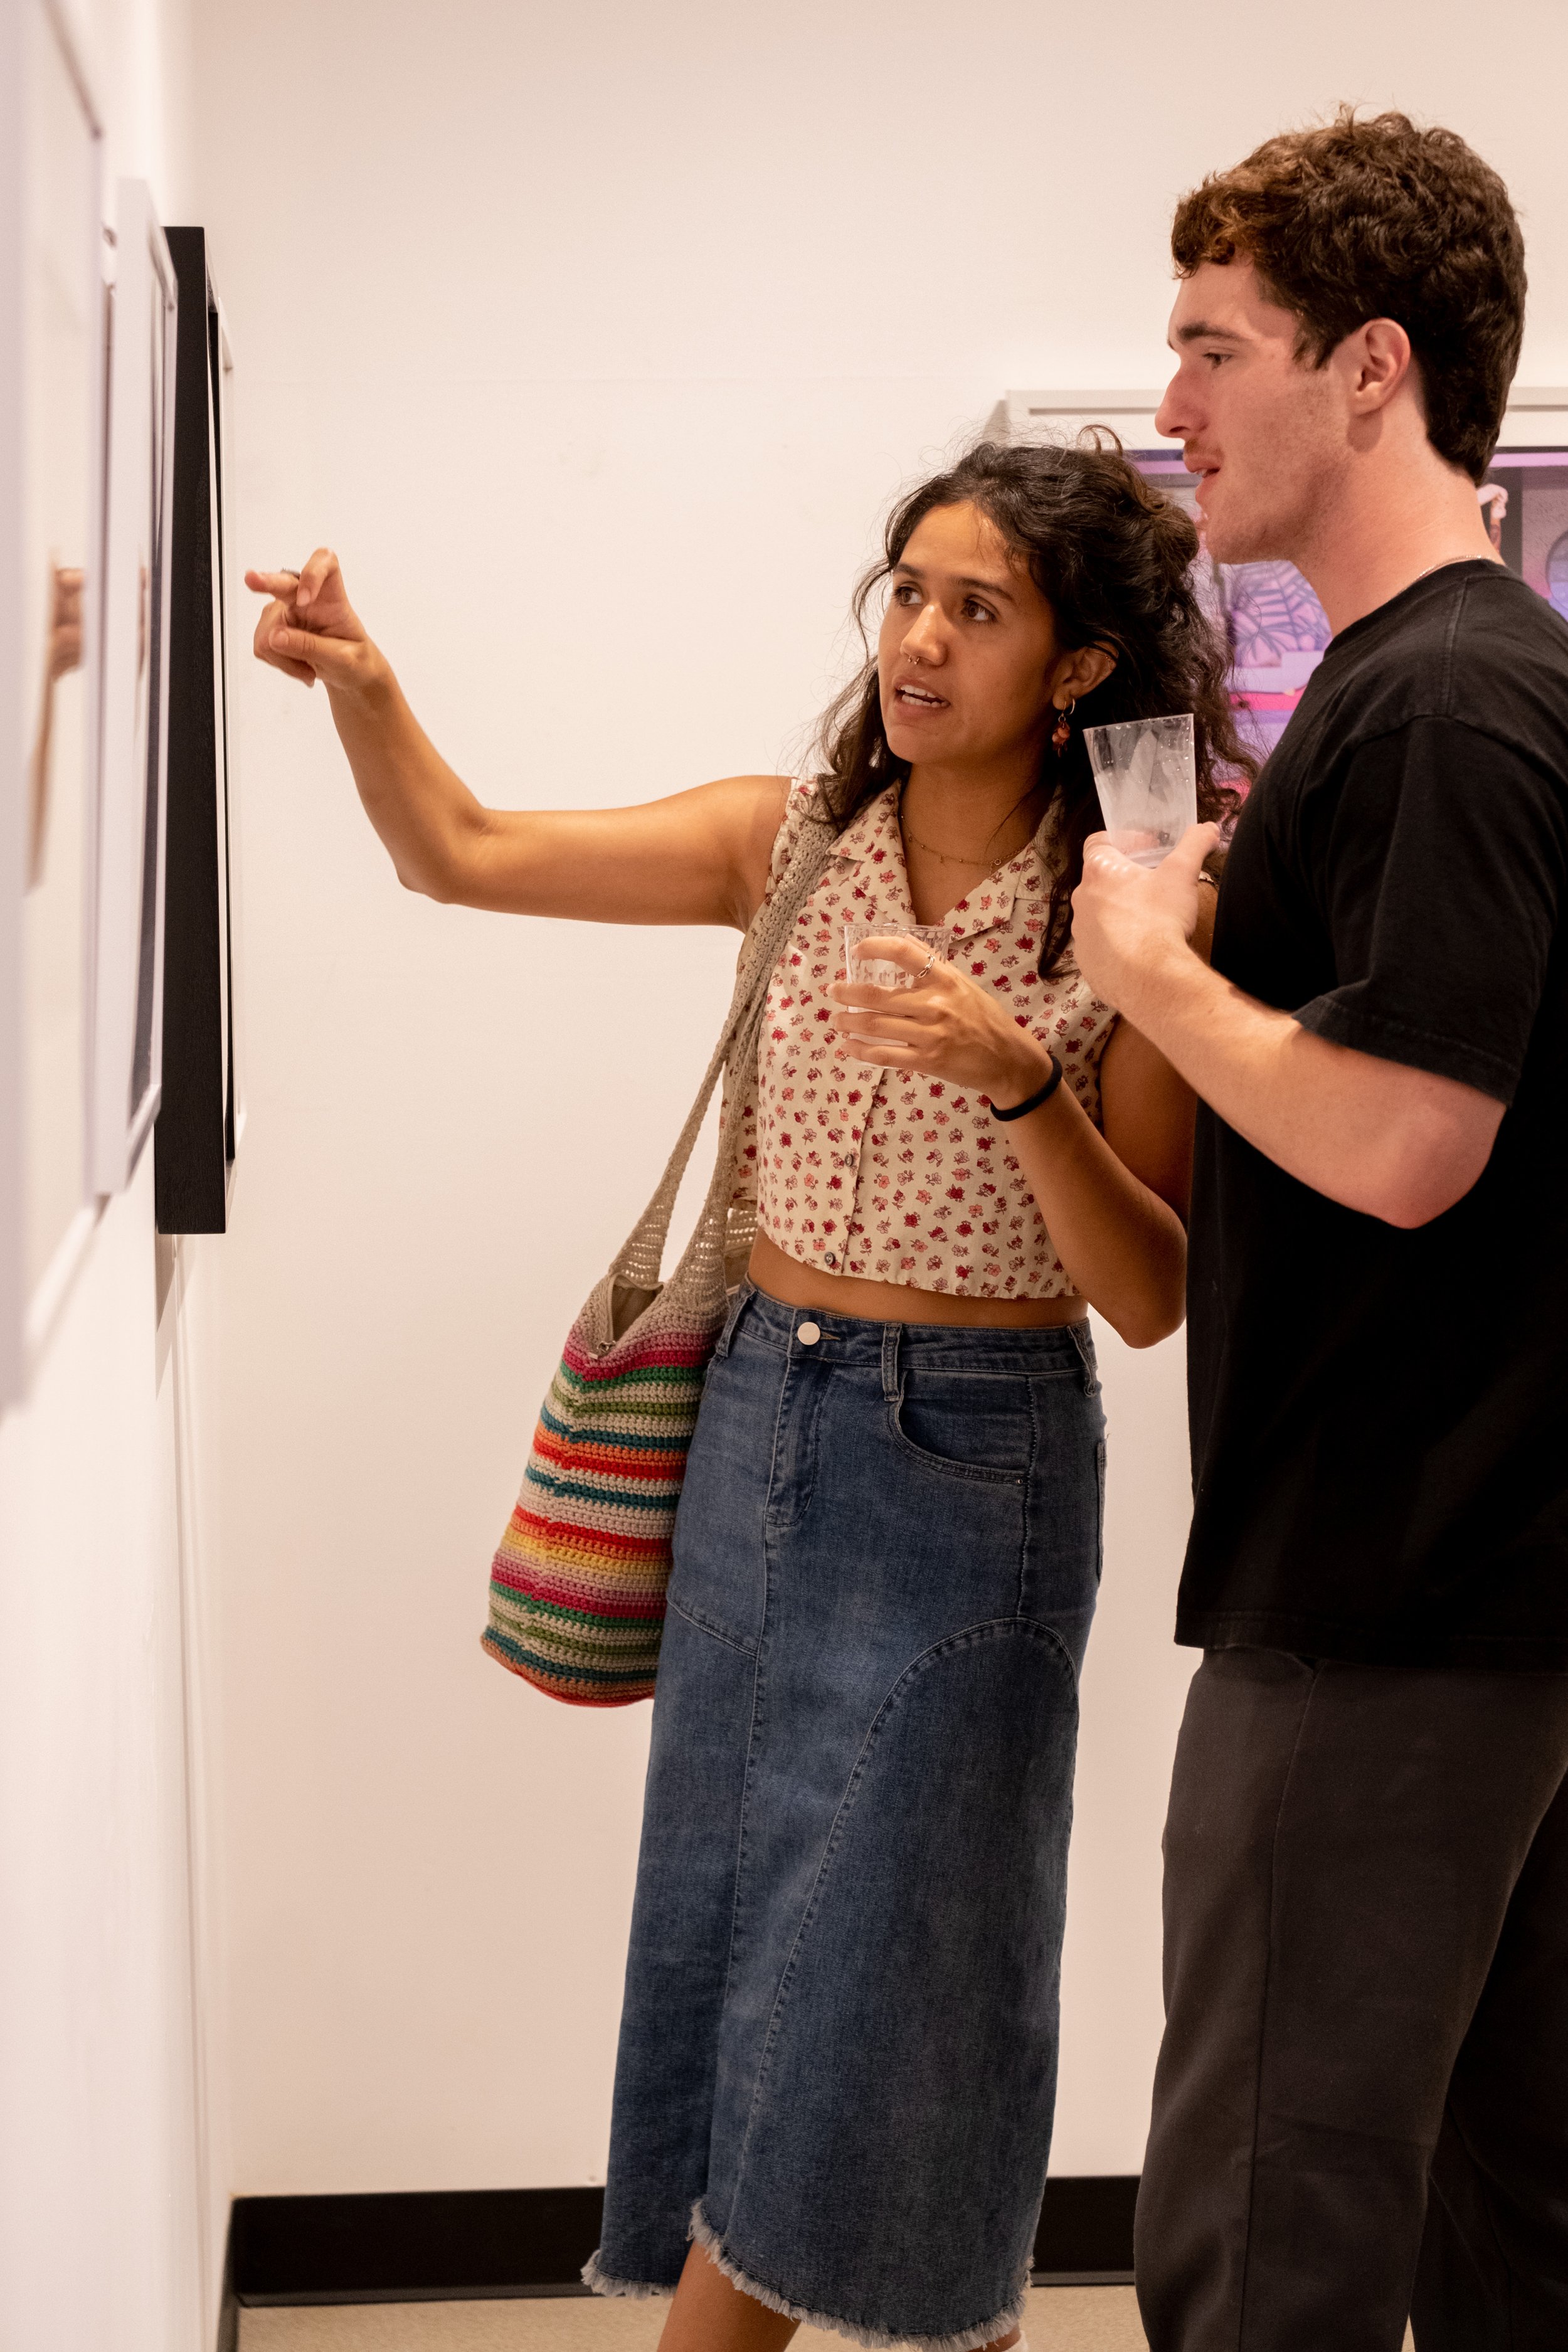  Art major Madison Singleton and her boyfriend Jack Simon observing the photos displayed in Drescher Hall, 2nd floor, at the Santa Monica College main campus in Santa Monica, Calif. at the opening reception of the annual Faculty & Staff Exhibition an